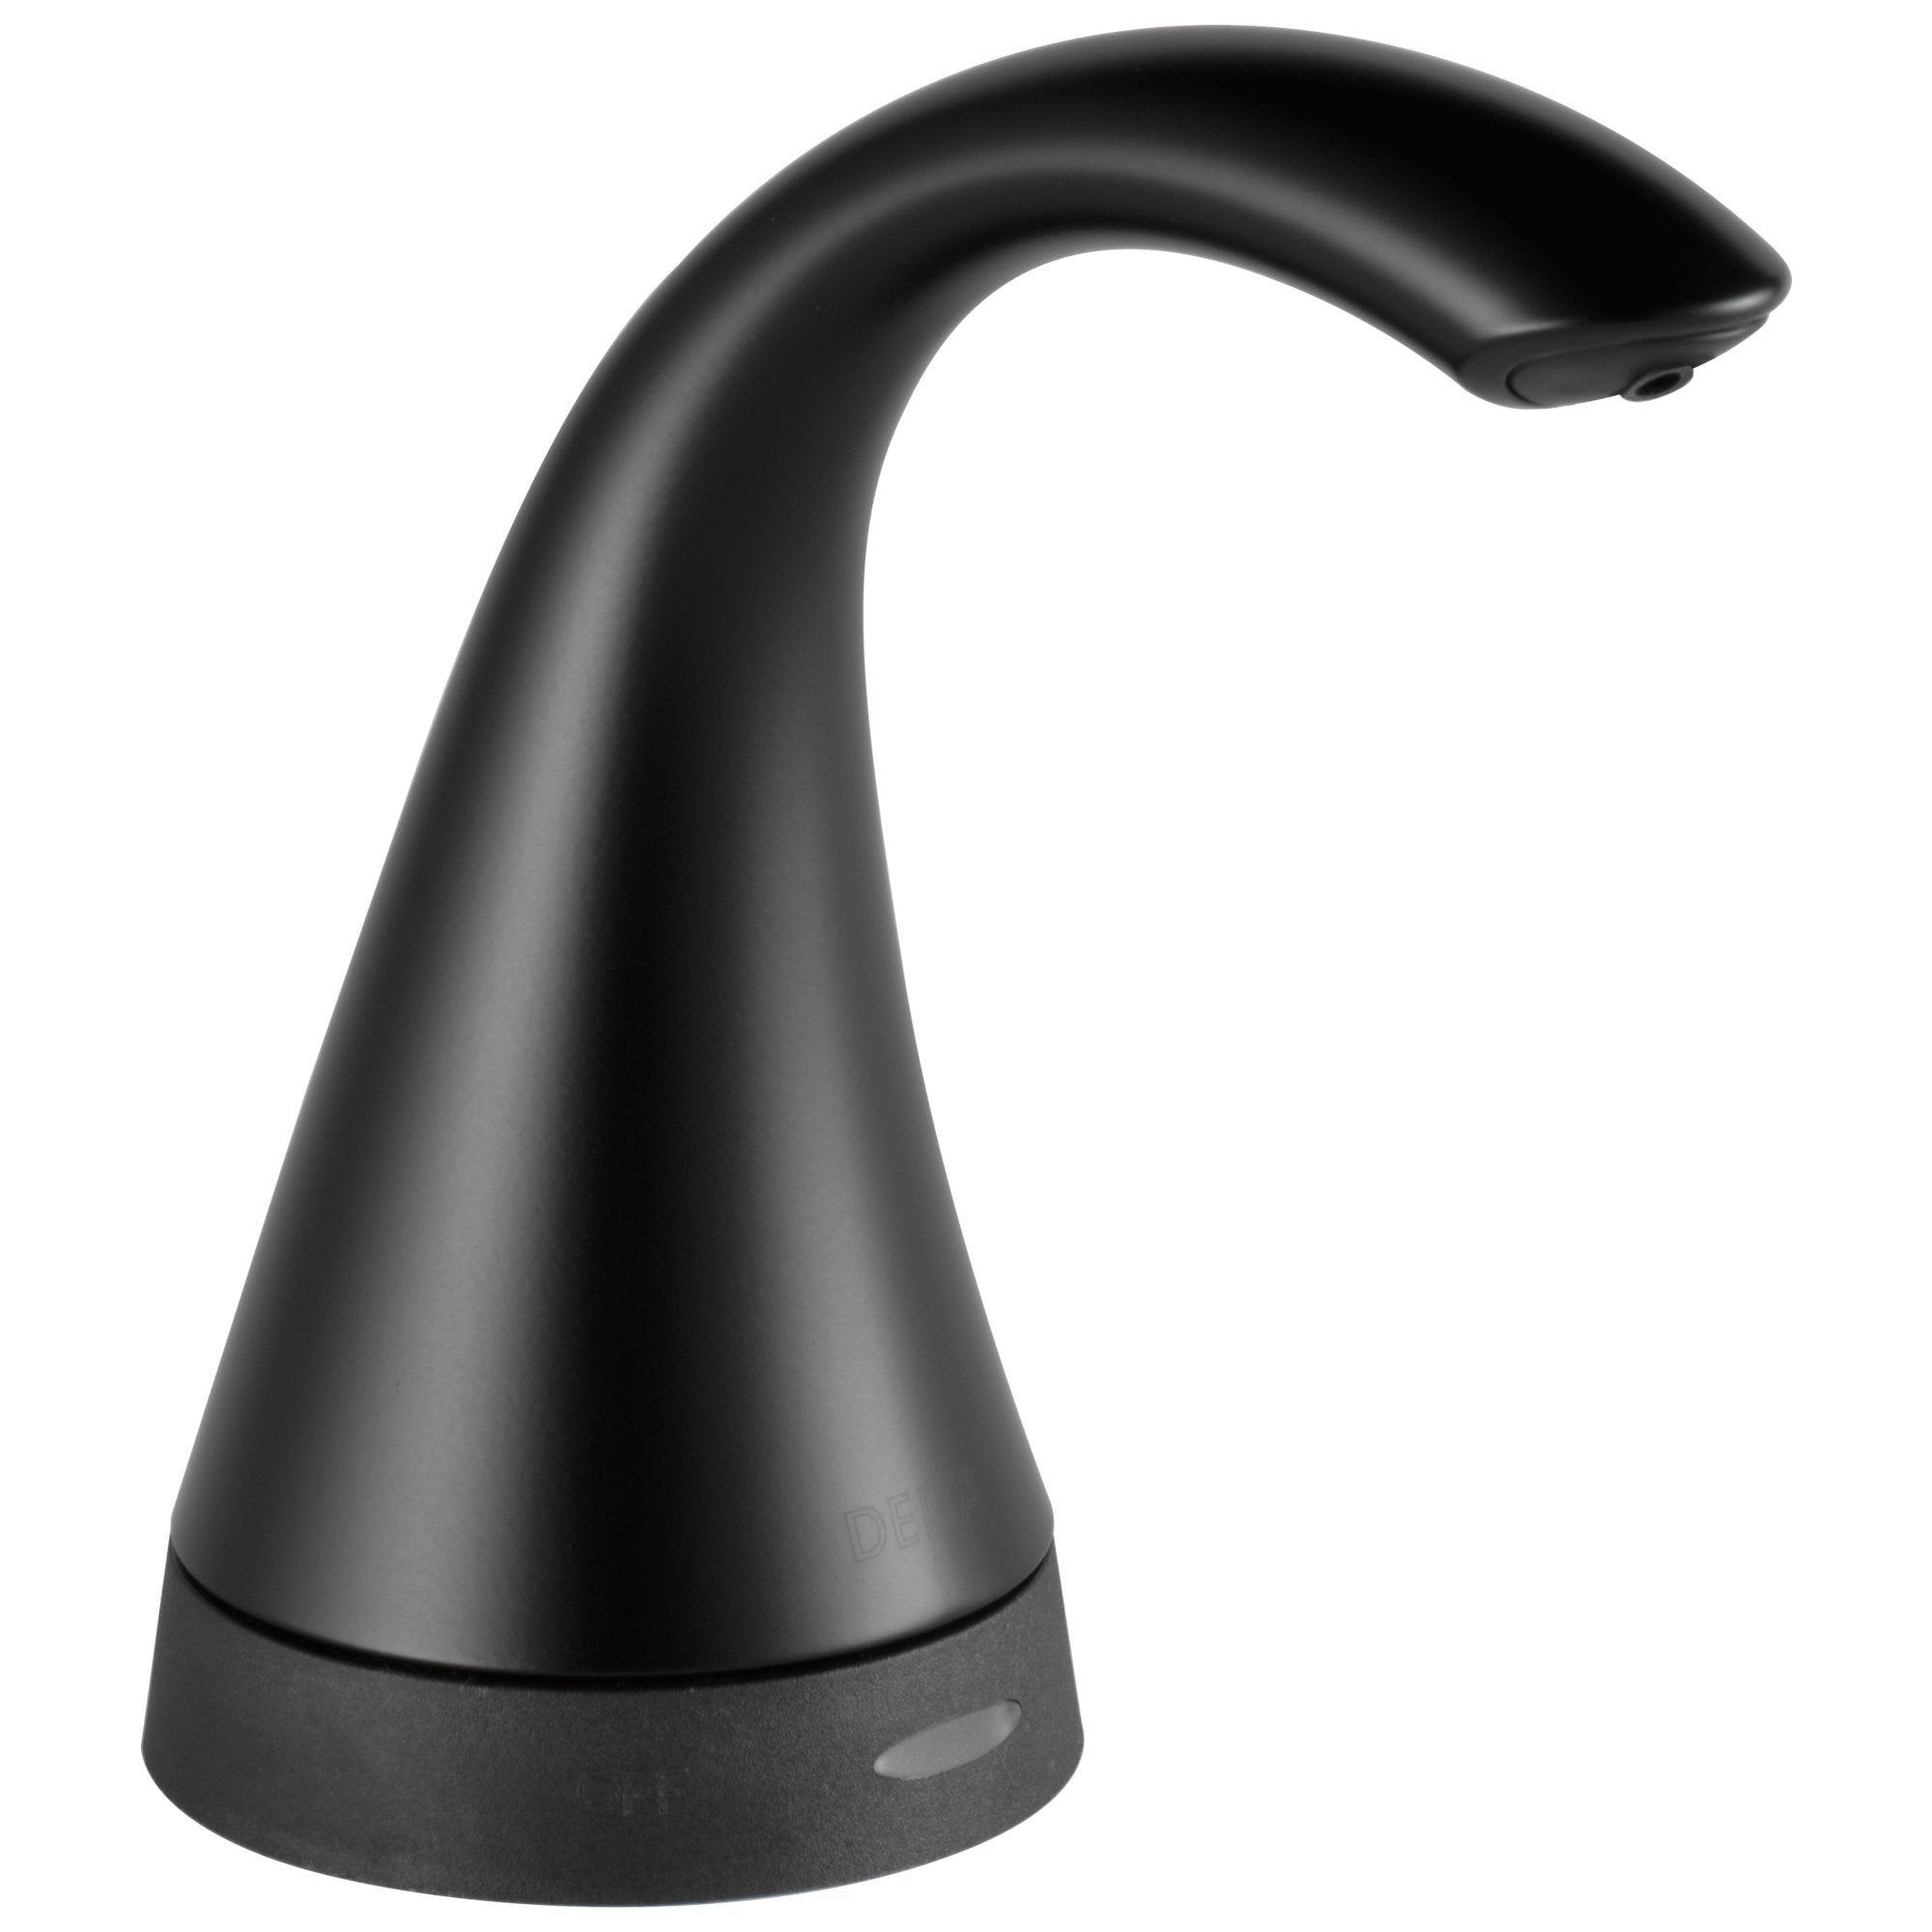 Delta Addison Collection Matte Black Finish Transitional Electronic Deck Mounted Soap Dispenser with Touch2Oxt Technology 732811